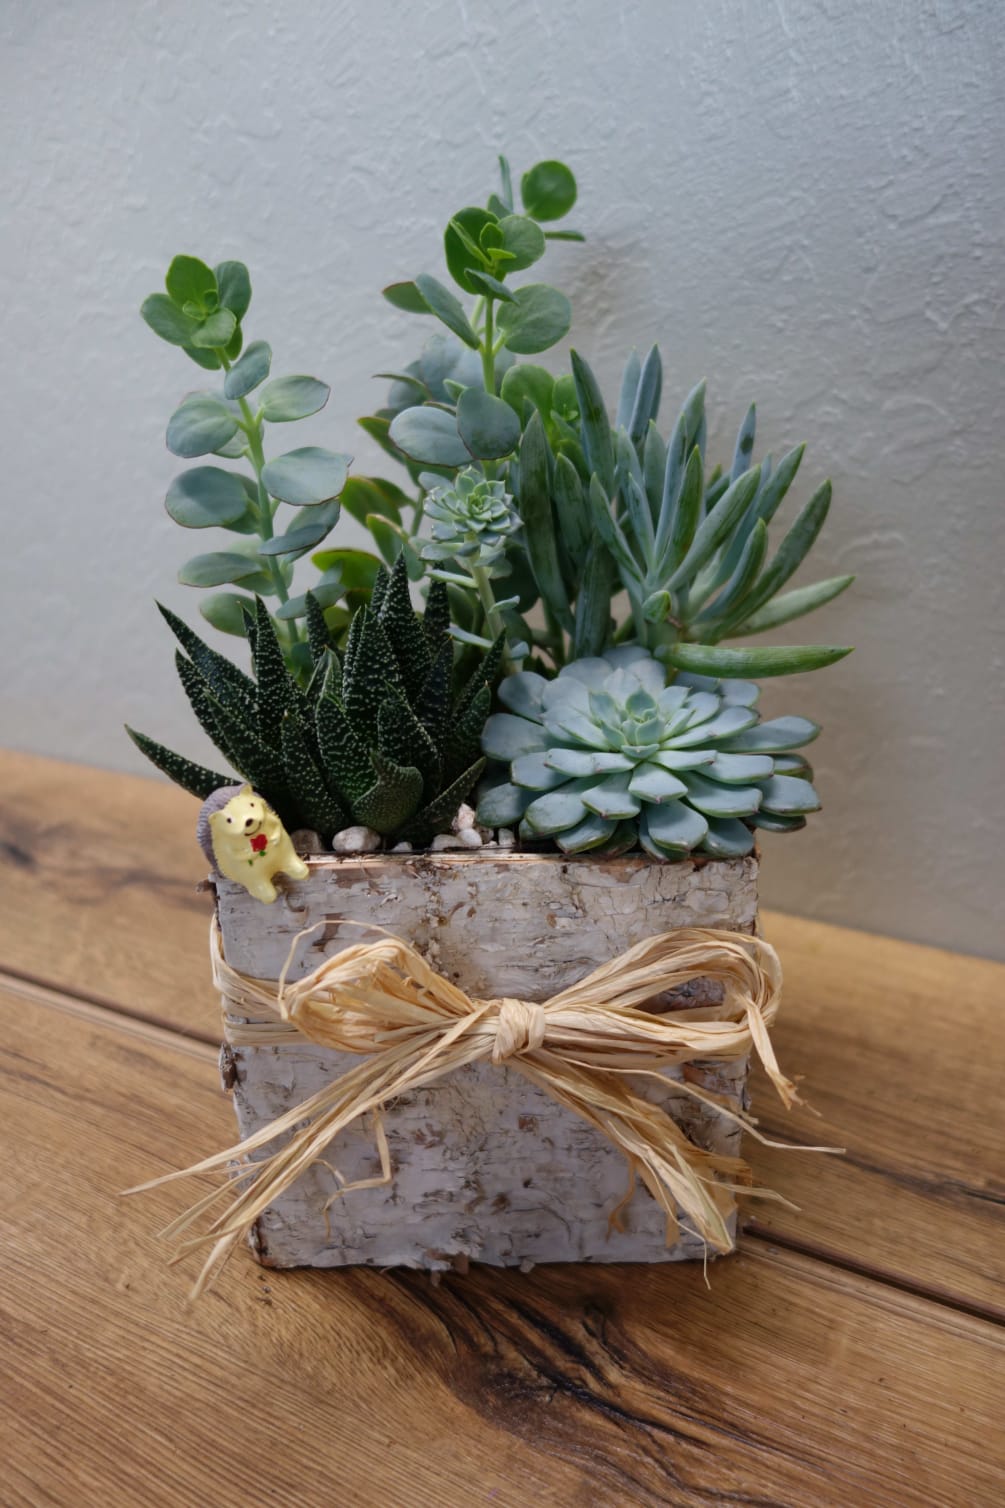 A natural rustic wooden planter with mixed succulents and a decorative straw